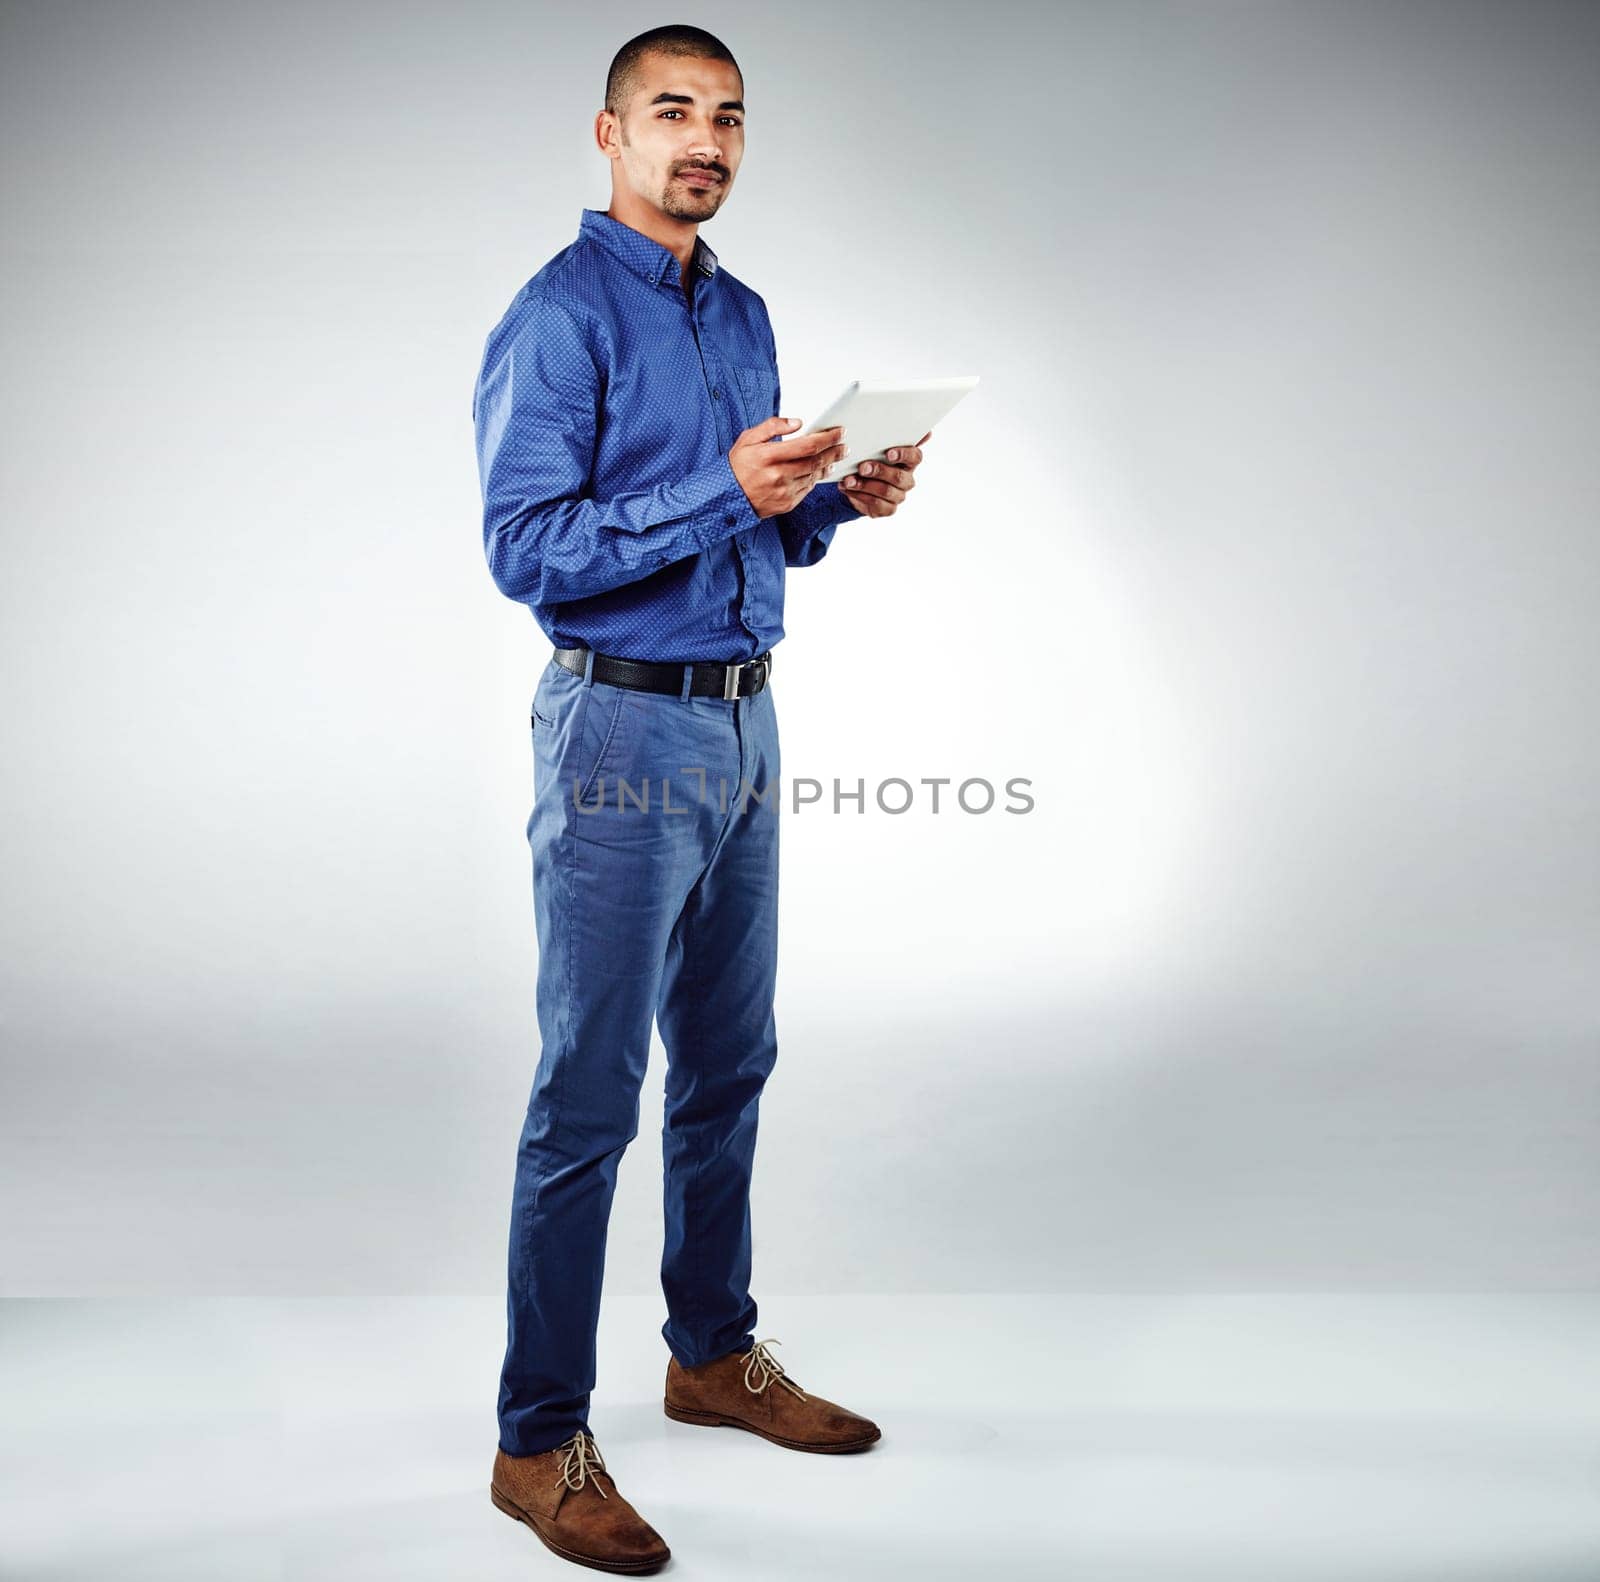 Stay current or ahead of the game. Studio shot of a young businessman using his tablet against a grey background